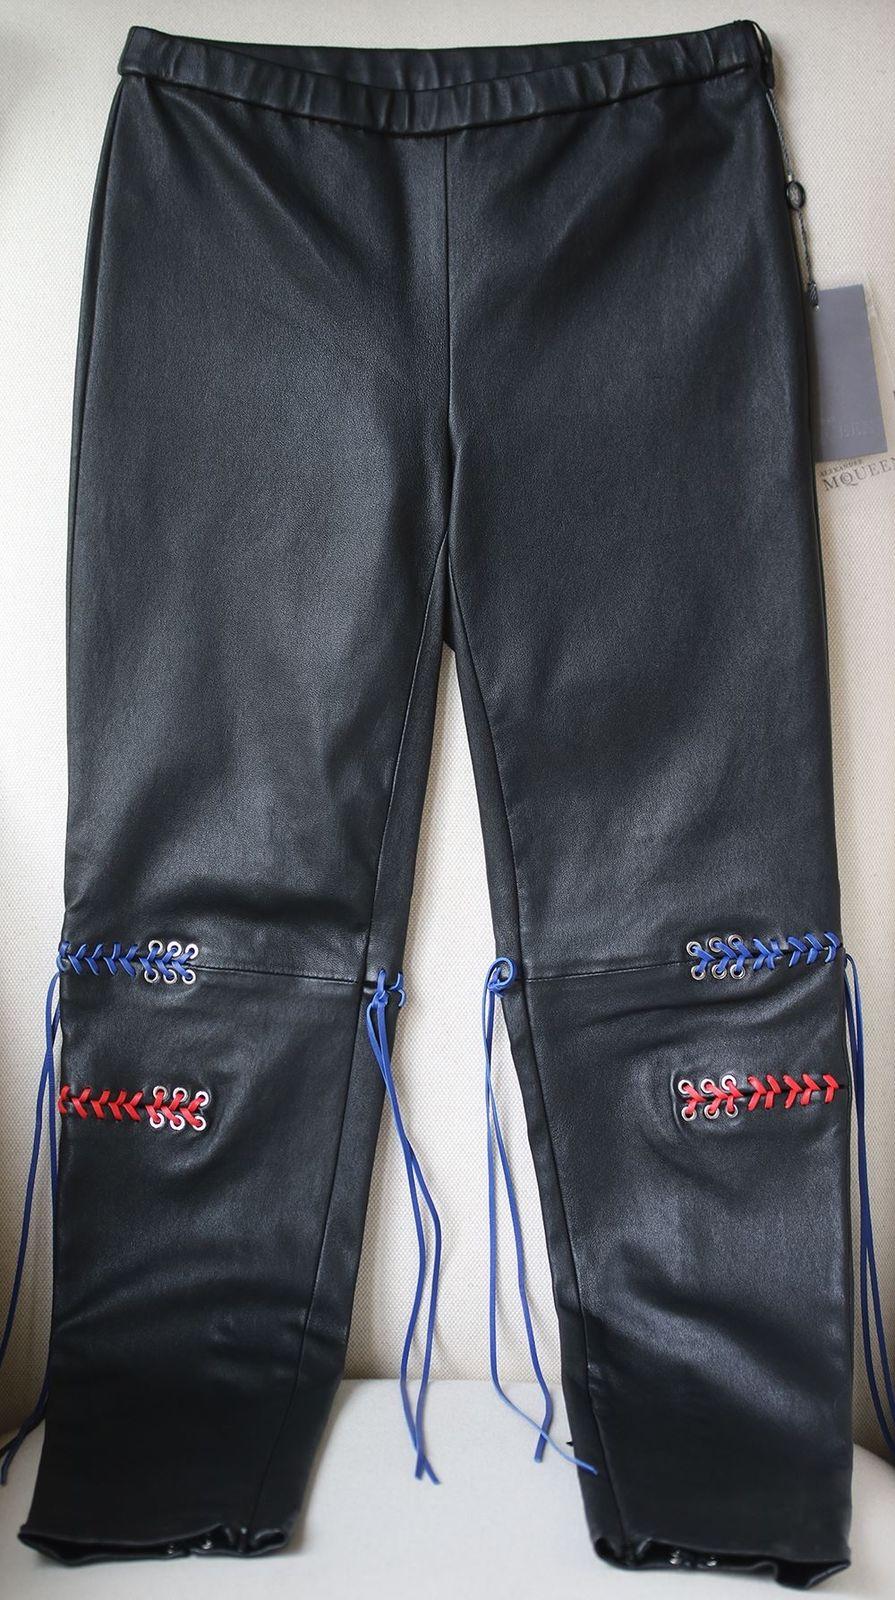 These leggings are cut from stretchy black leather and have red and blue whipstitch lacing - a nod to the region's 'Cloutie' trees which are strung with strips of cloth to represent hopes, dreams and wishes. Black, blue and red stretch-leather.